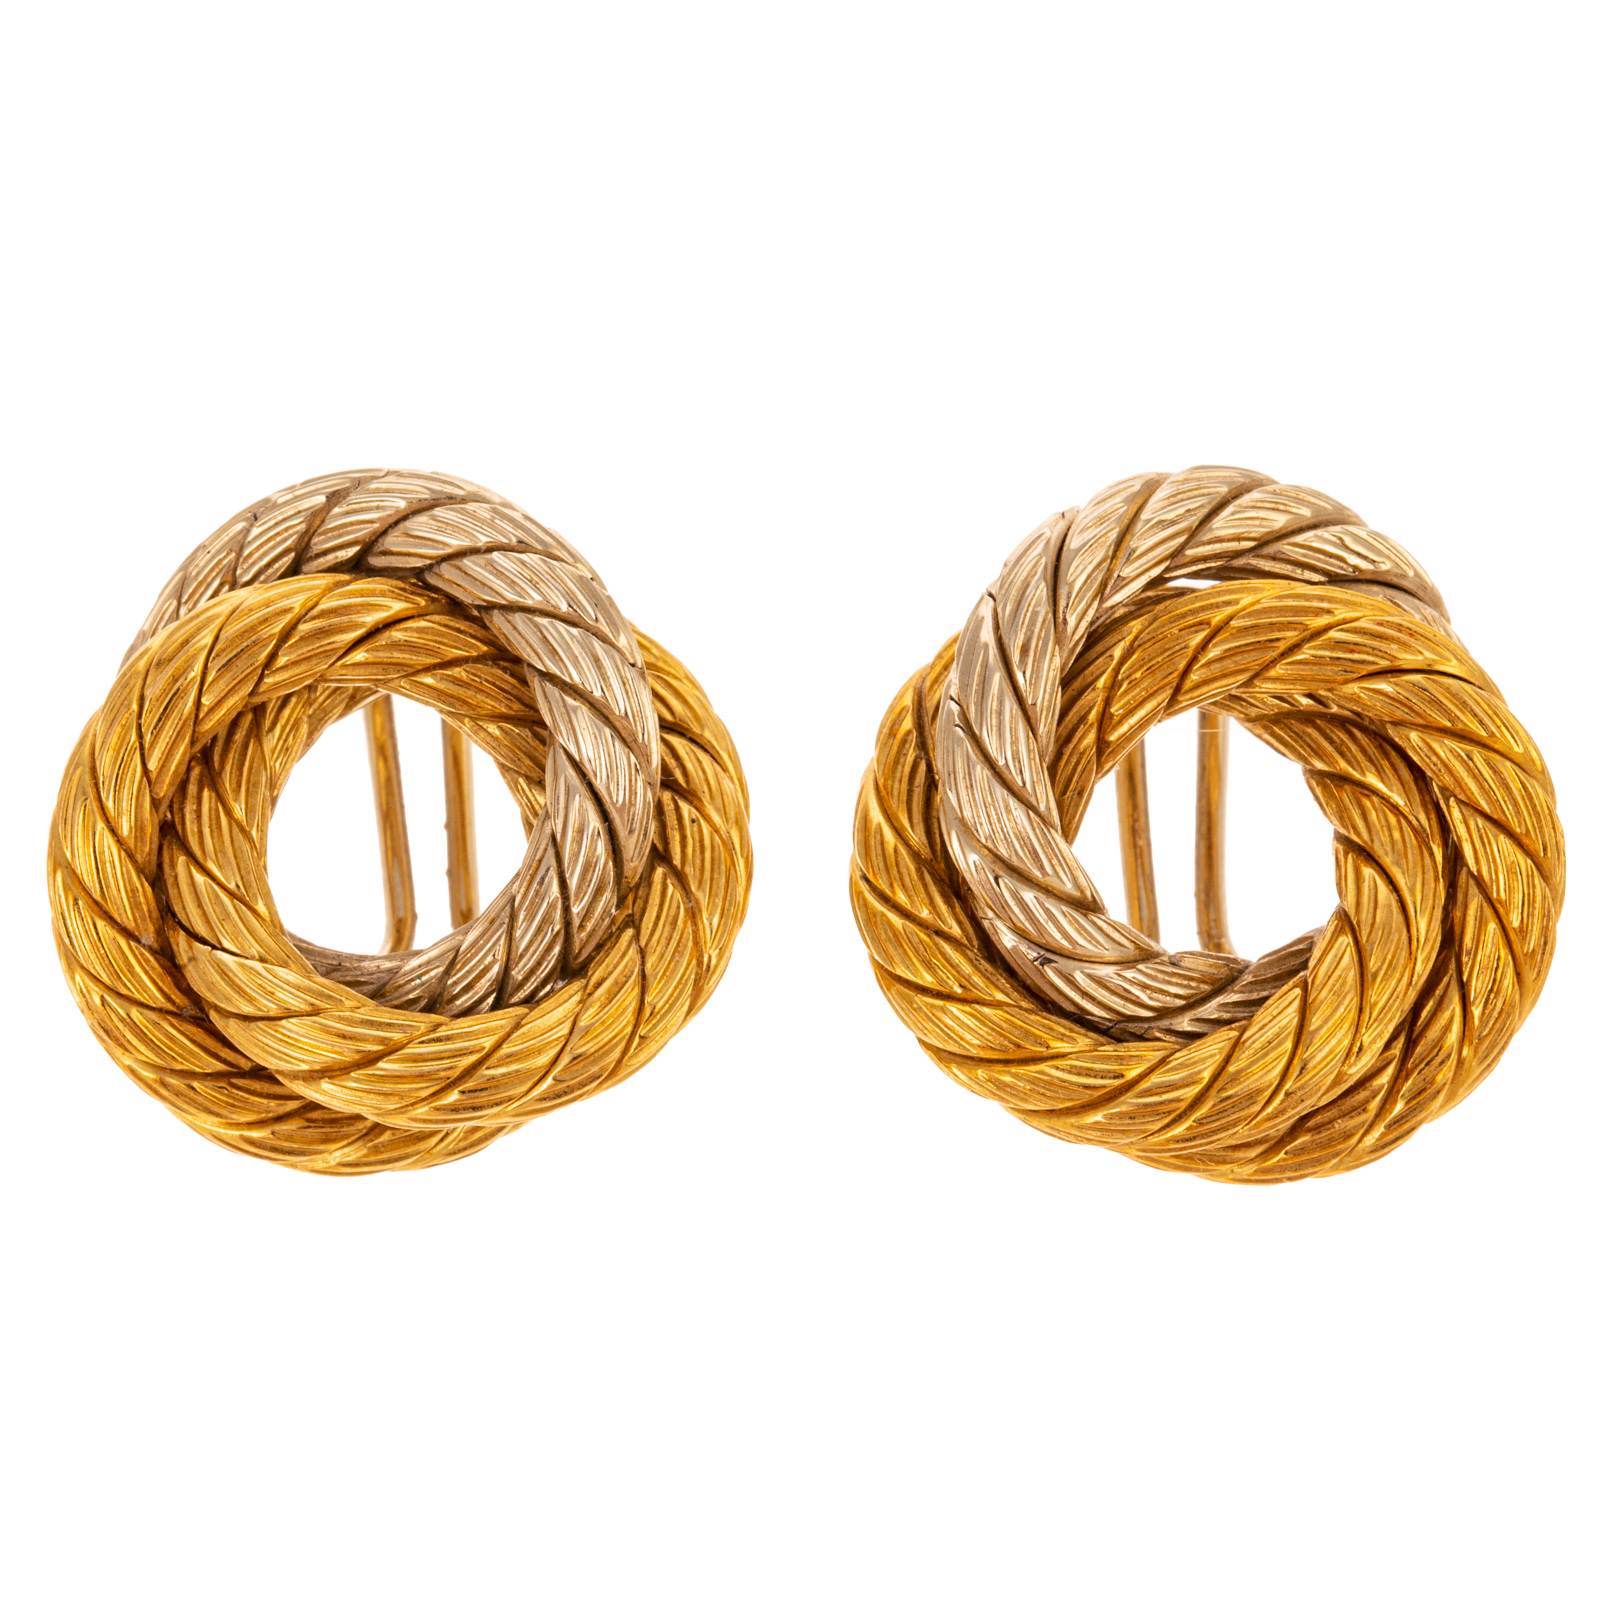 A PAIR OF 18K TWO-TONE KNOT CLIP